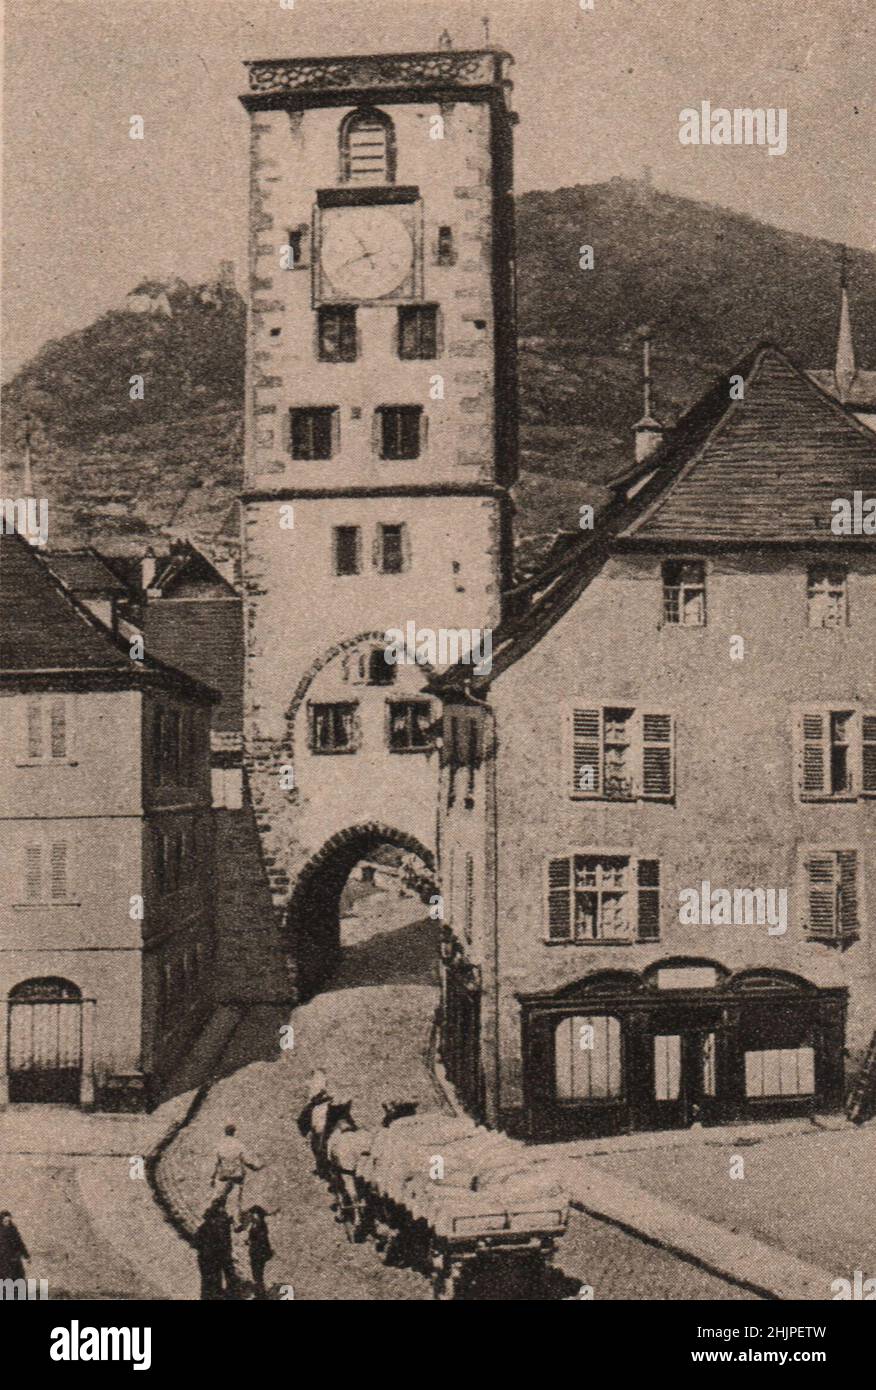 Portrayed in this venerable dwelling-house and gate tower respectively. Alsace-Lorraine (1923) Stock Photo